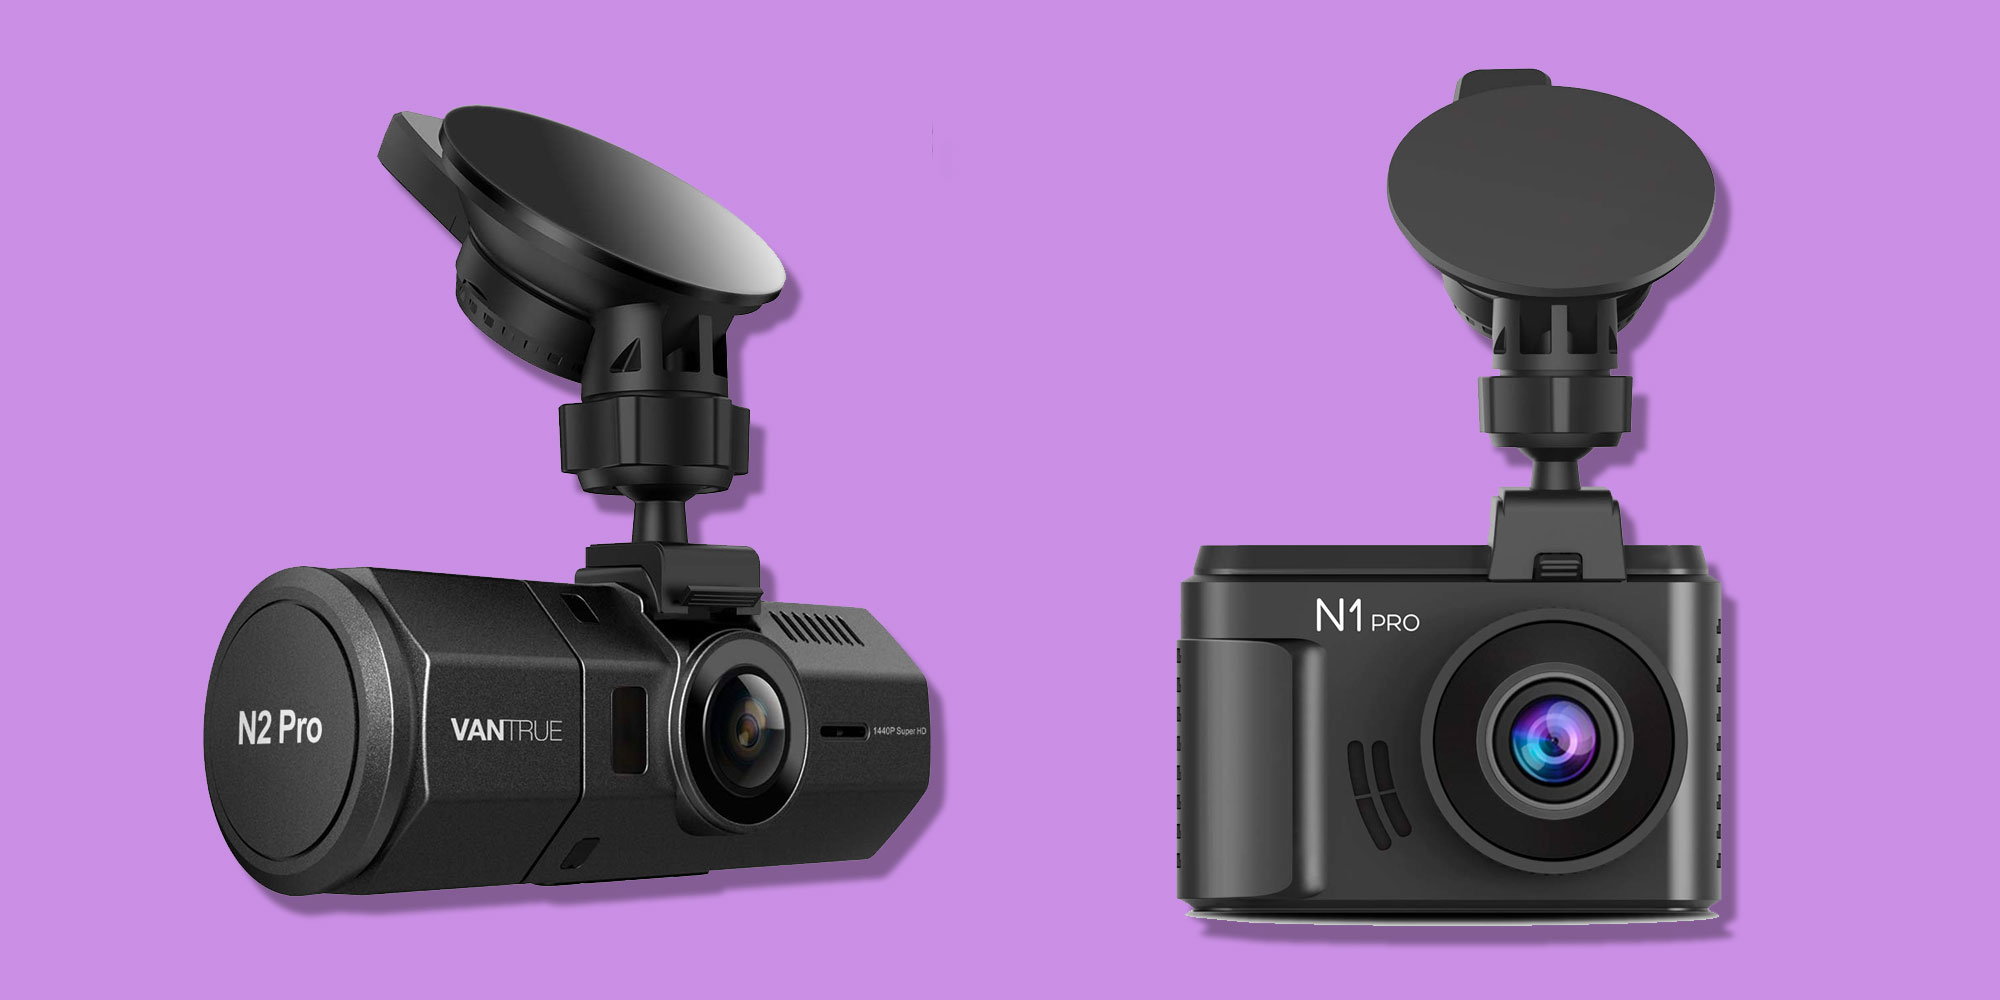 These dash cams record your drives in up to 1440p from 60 shipped